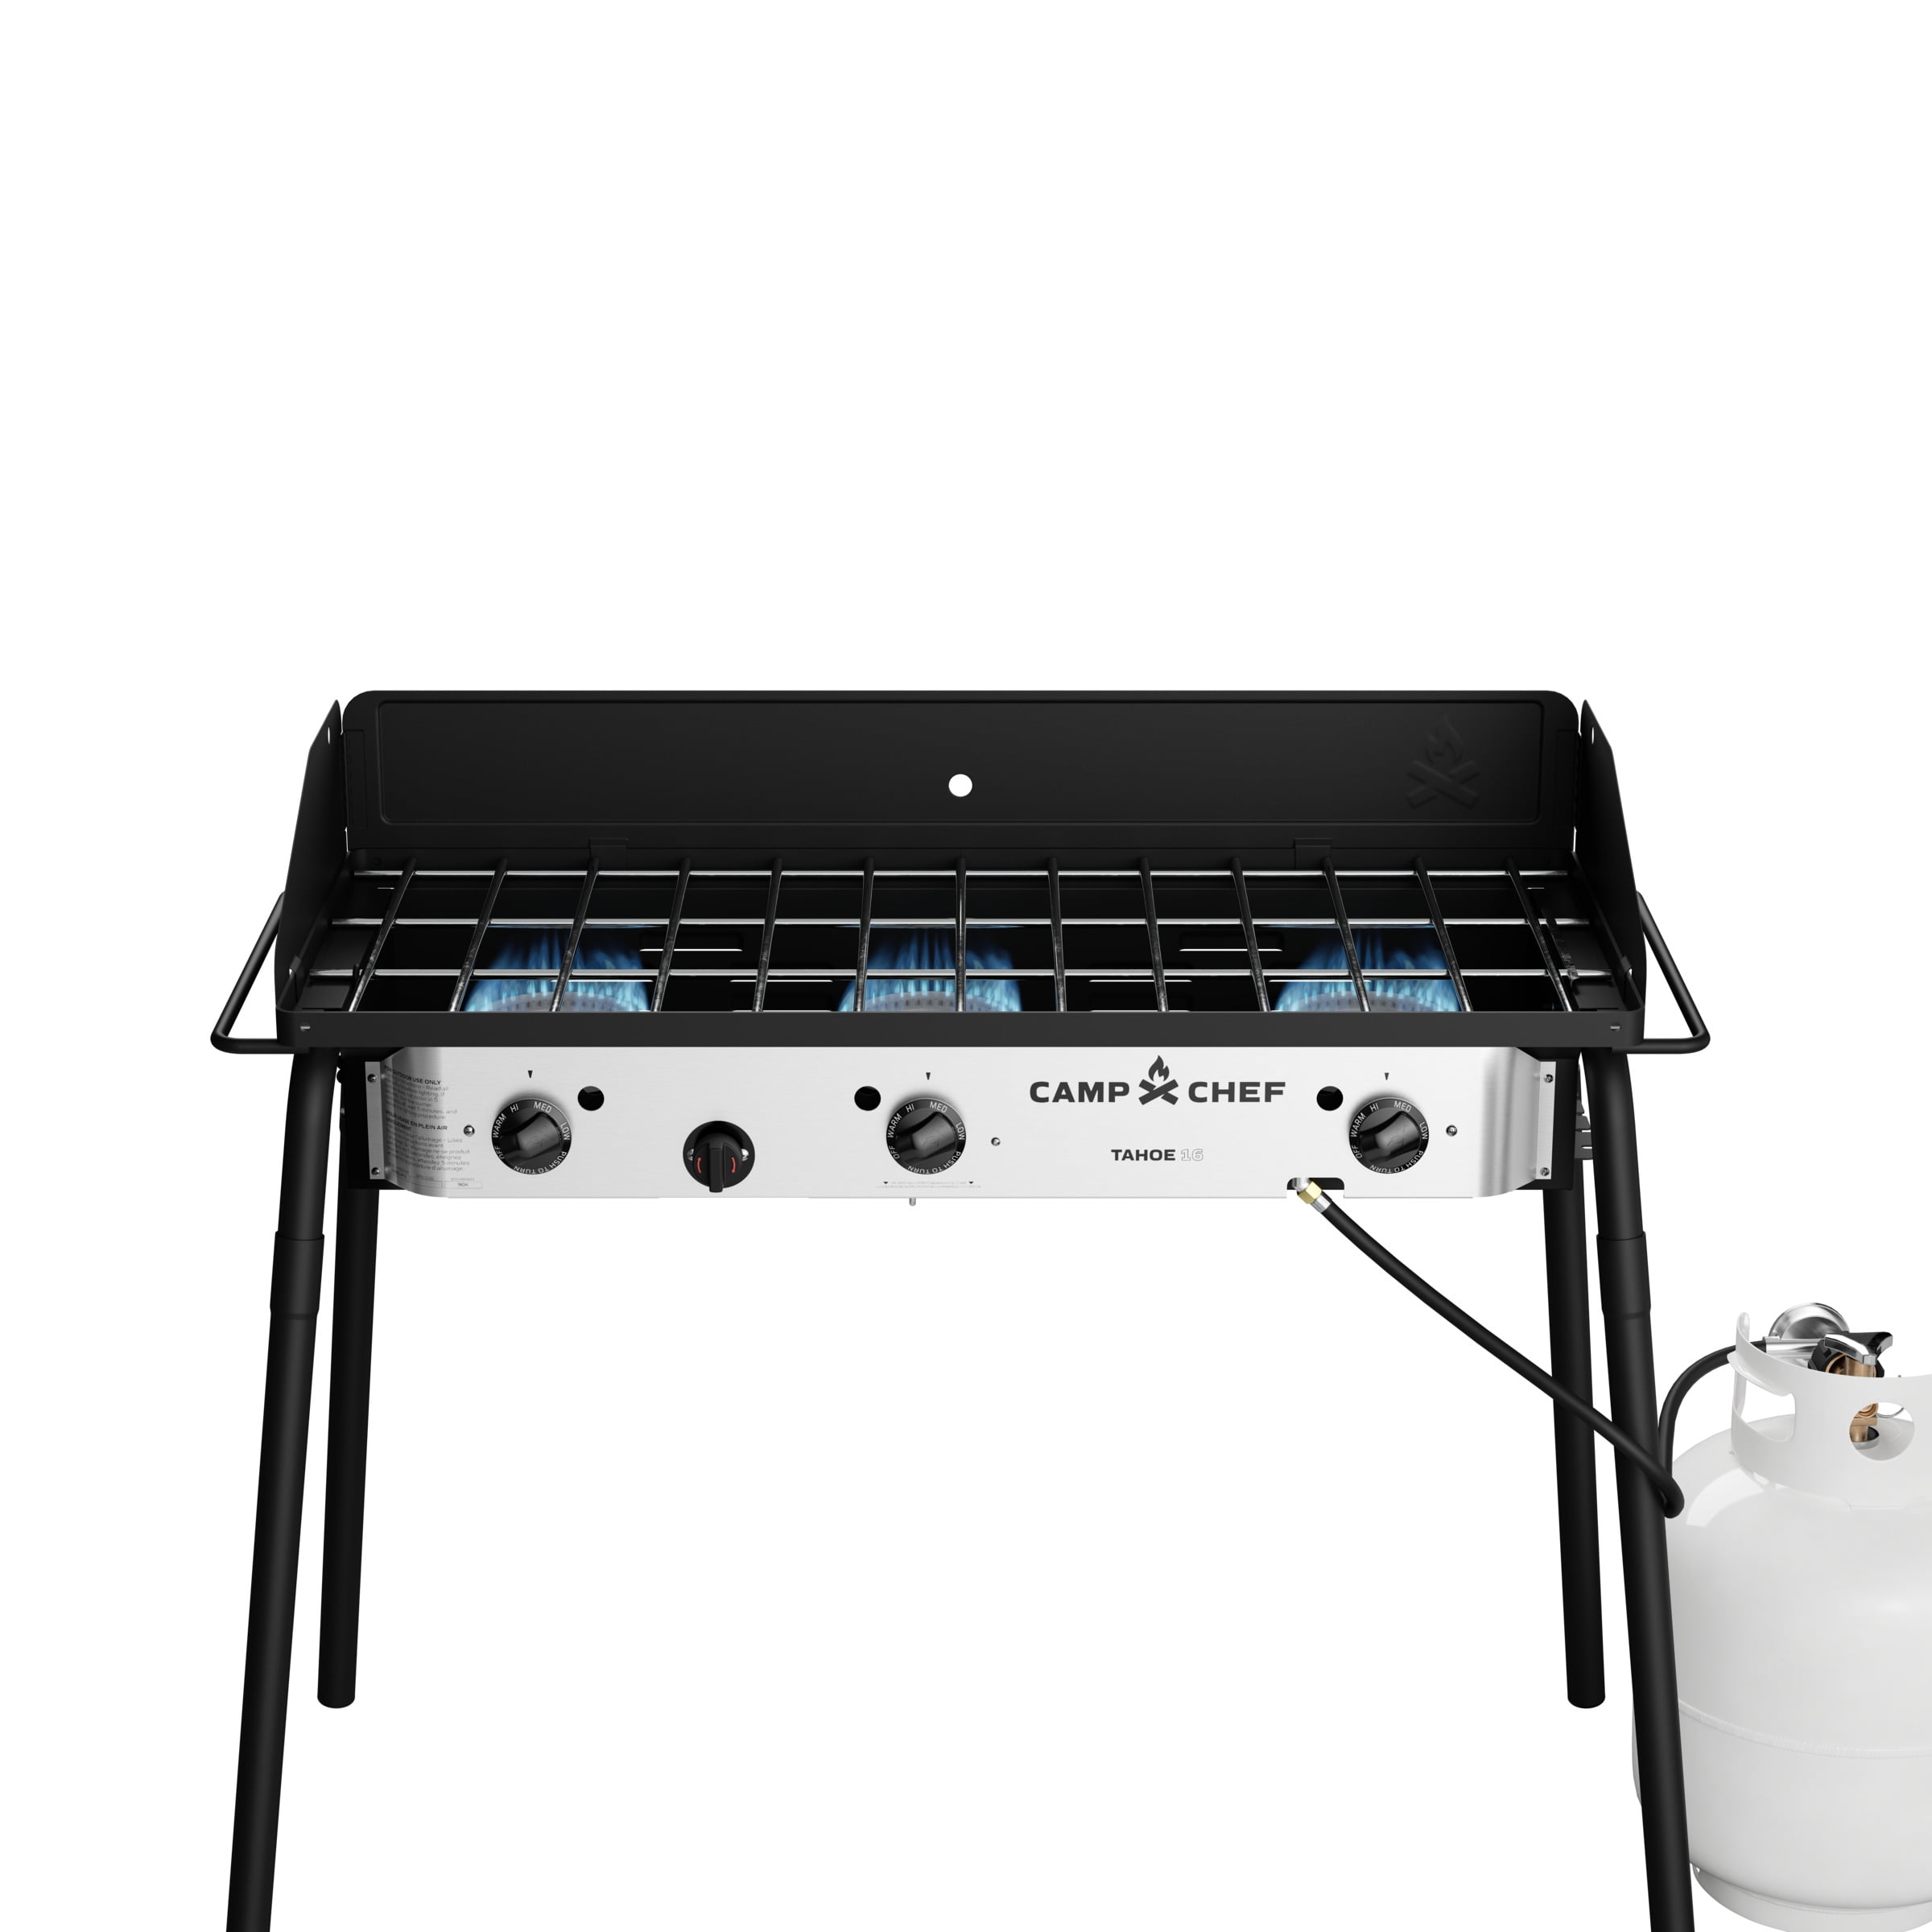  Single Propane Gas Stove for Outdoor or Indoor Cooking